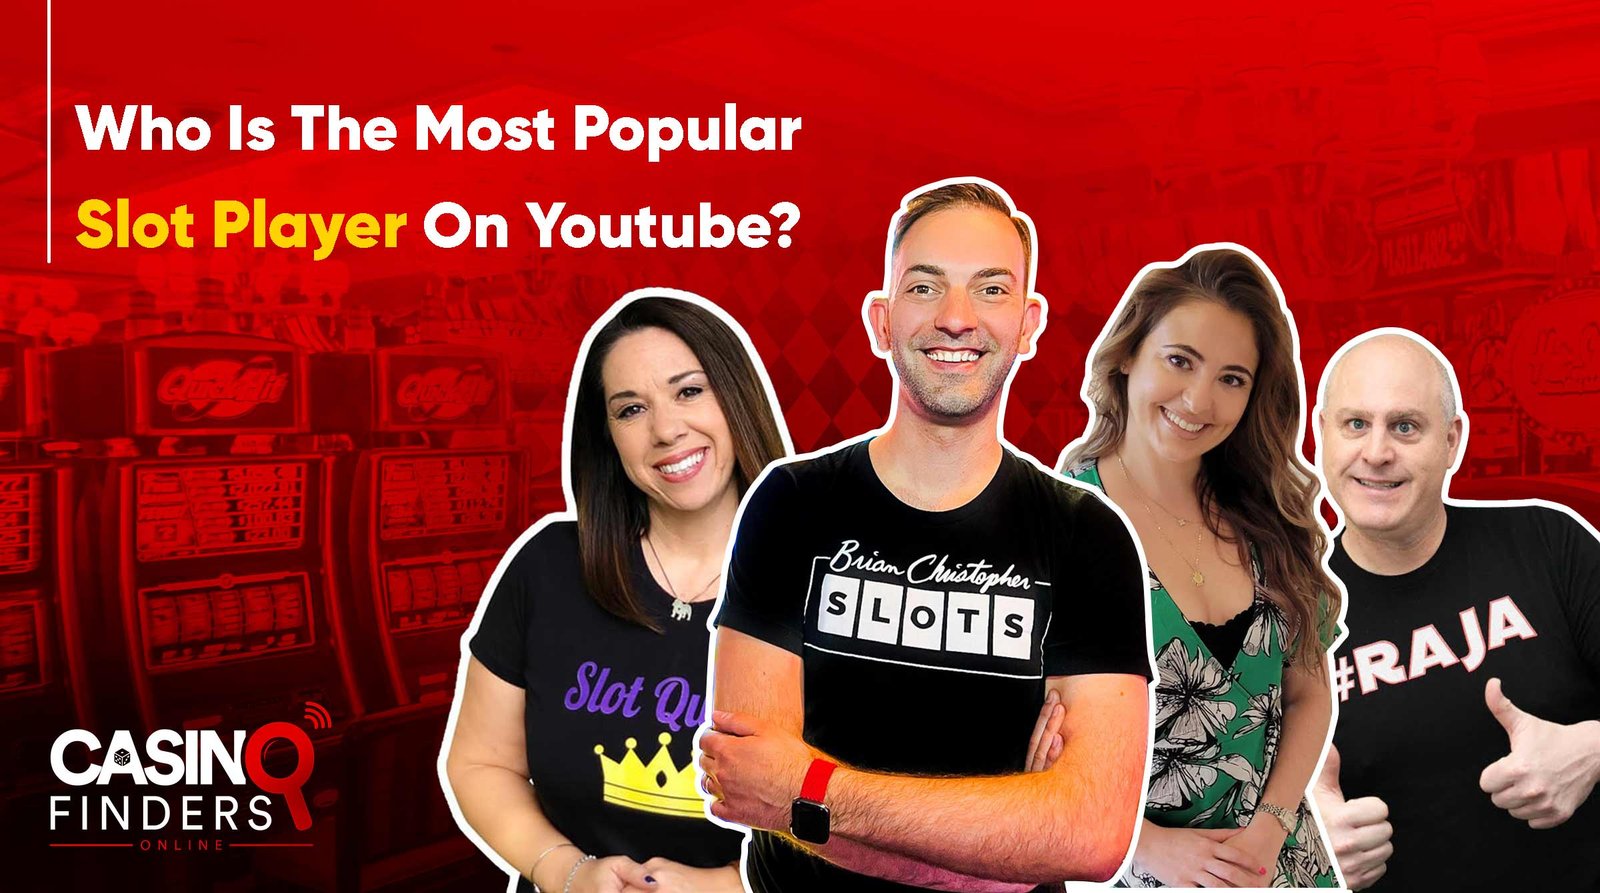 Who Is The Most Popular Slot Player On YouTube?